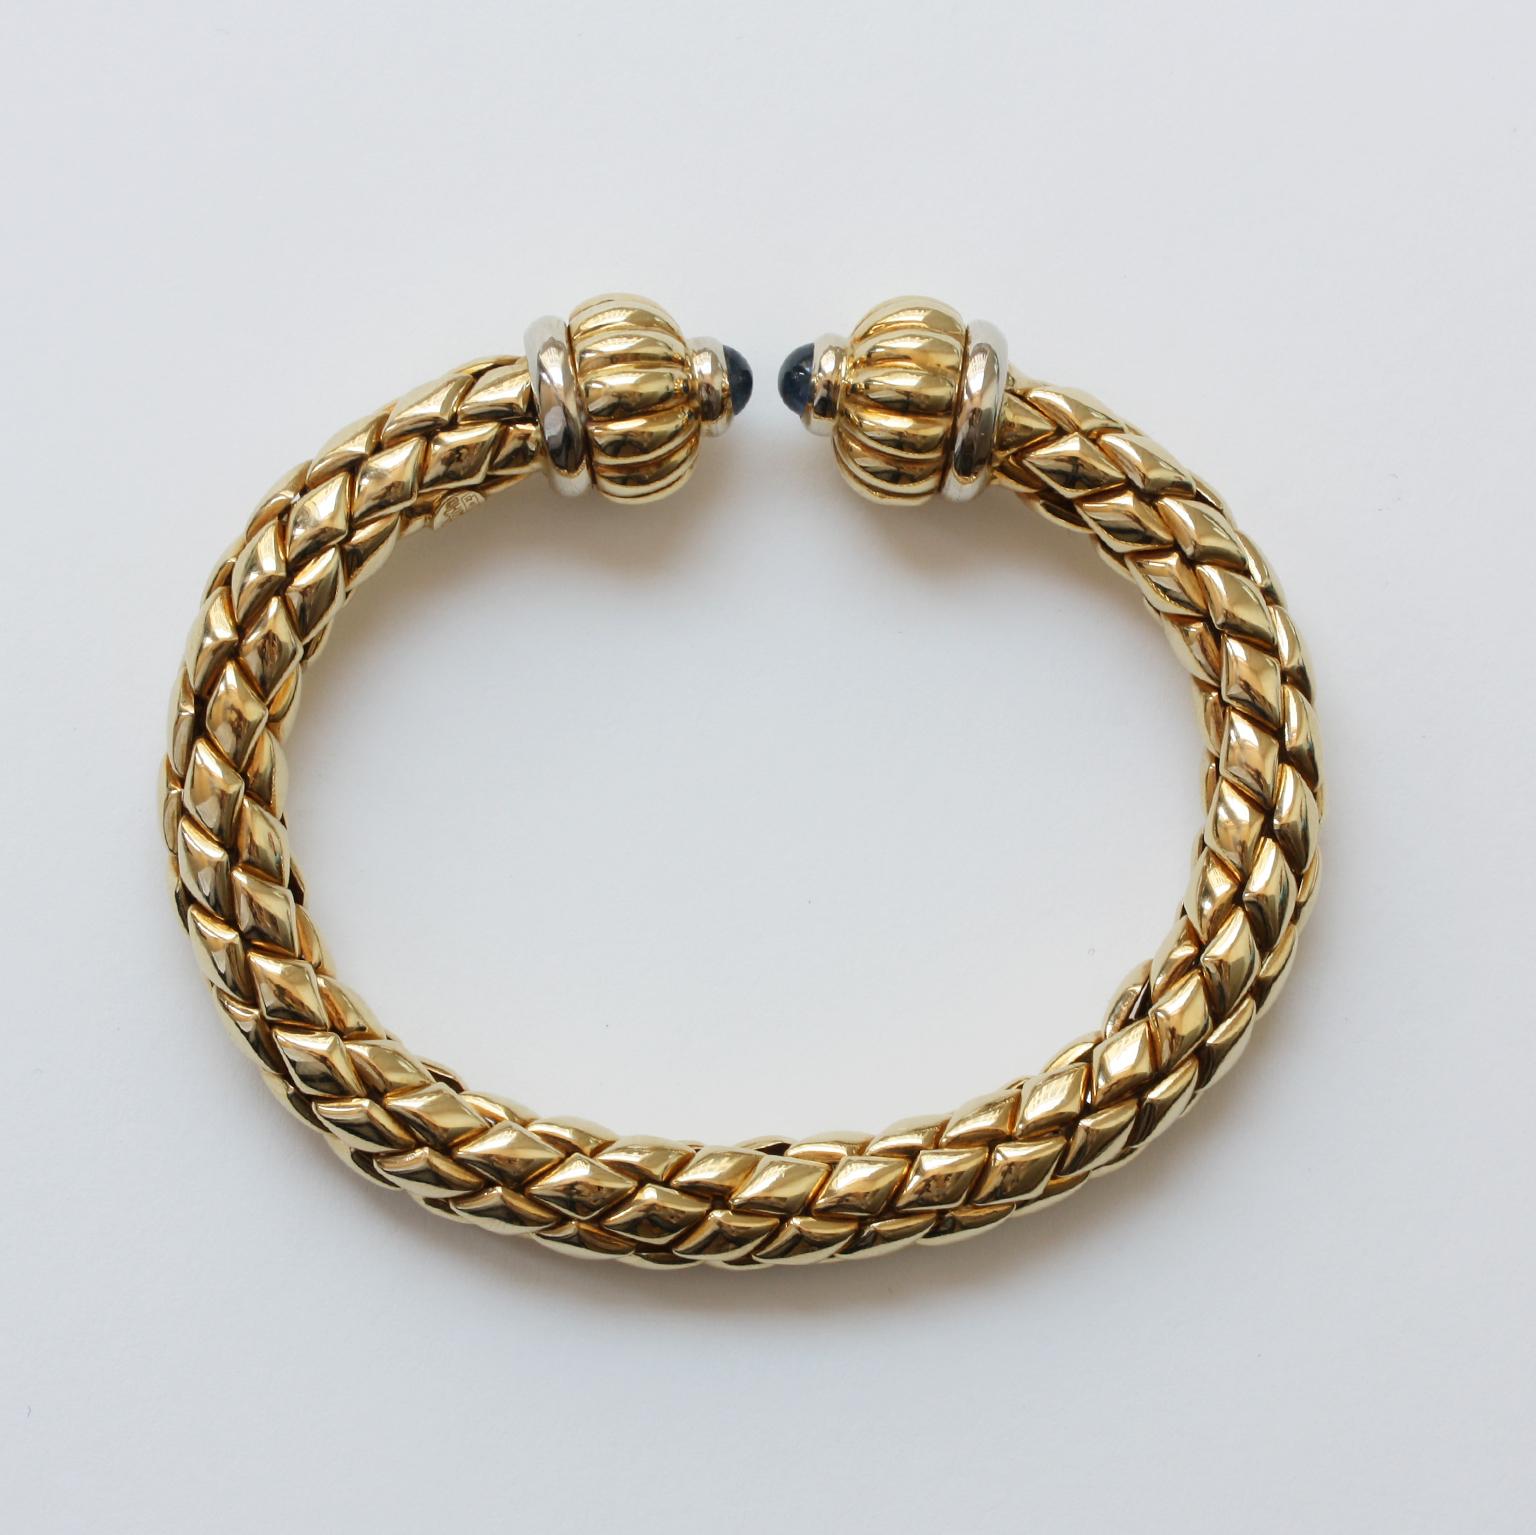 An 18 carat gold bracelet bangle, flexible round woven with two open ends, on each and a turban decoration with yellow and white gold and a cabochon cut sapphire, signed Chimento, Italy, circa 1980.

dimensions: 6 x 4.2 cm
circumference: 16.5 cm